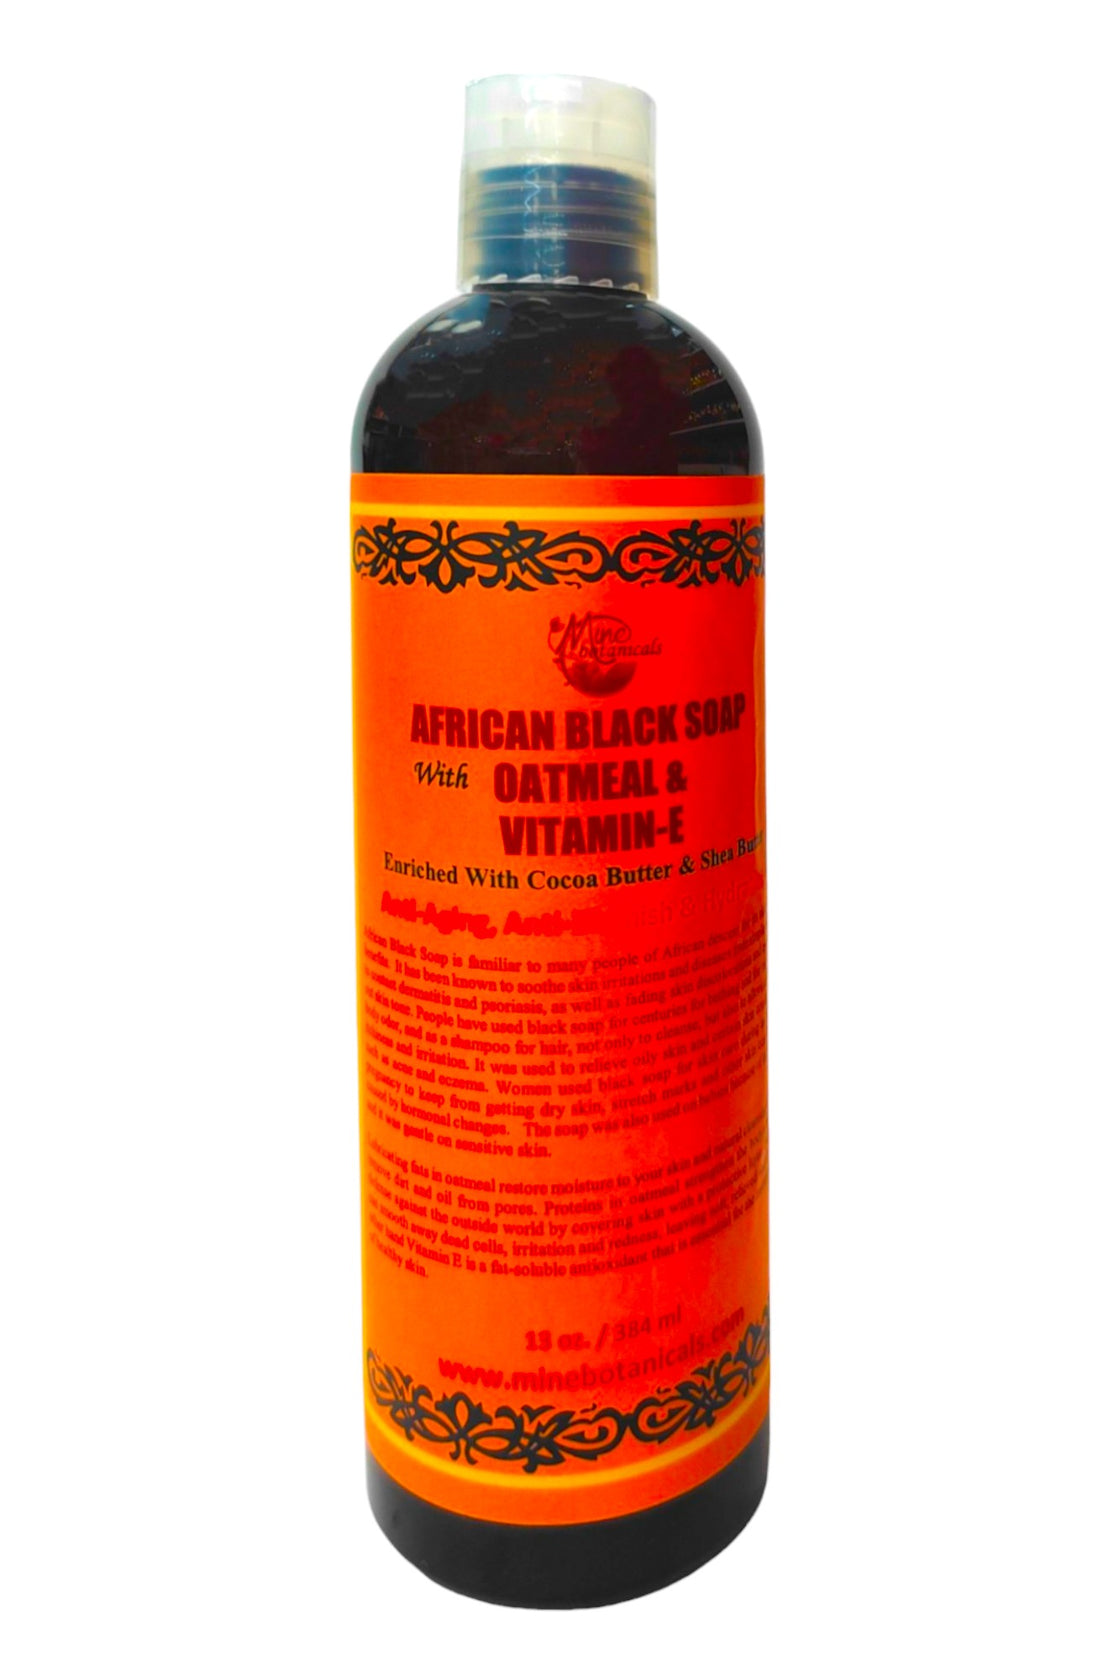 African Black Soap With Oatmeal & Vitamin -E